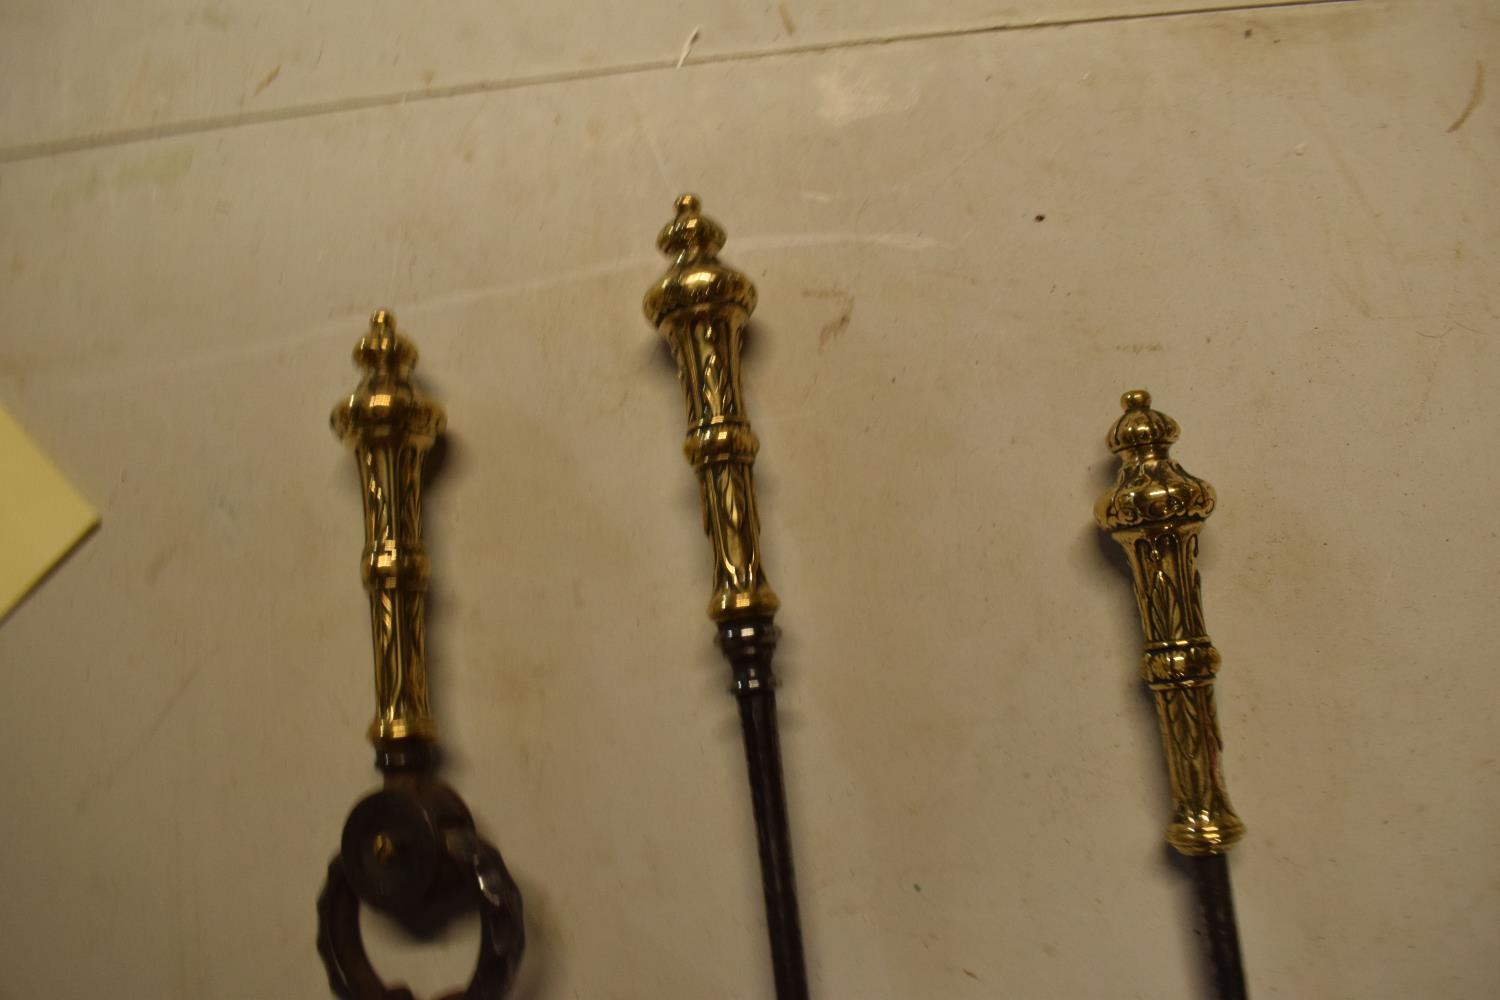 Brass and metal fire companion set (heavy duty). No postage, condition reports or extra photos are - Image 2 of 2